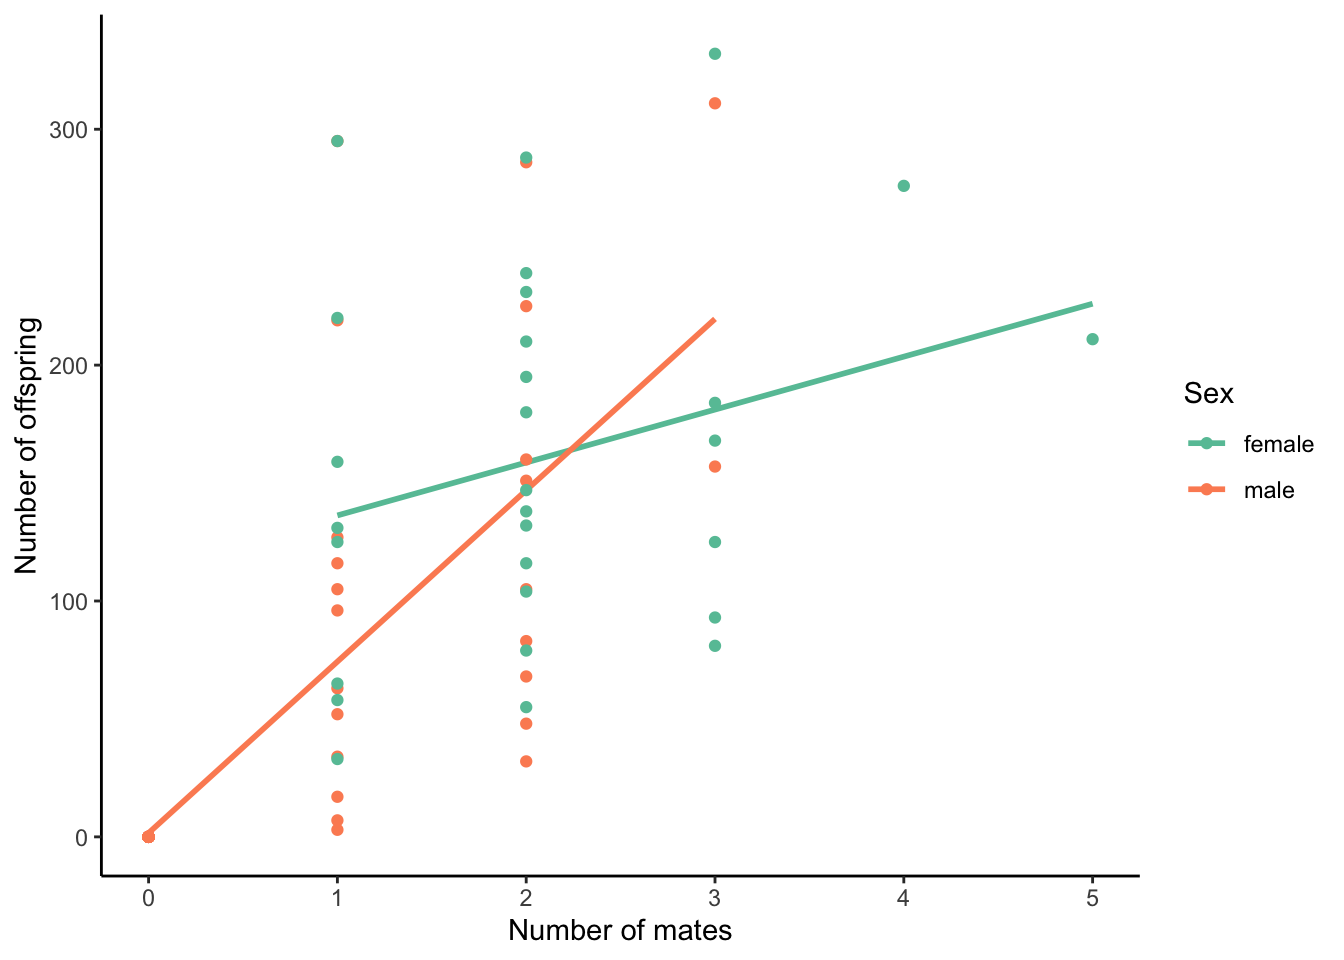  The number of offspring produced as a function of mating success for male and female rough-skinned newts (*Taricha granulosa*). The rate at which males can increase their reproductive success through multiple mating exceeds that of females. Note that the slope of the best-fit lines are also known as sexual-selection gradients. [Data](data/10_salamdander-mating.csv) from Jones et al. (2002).